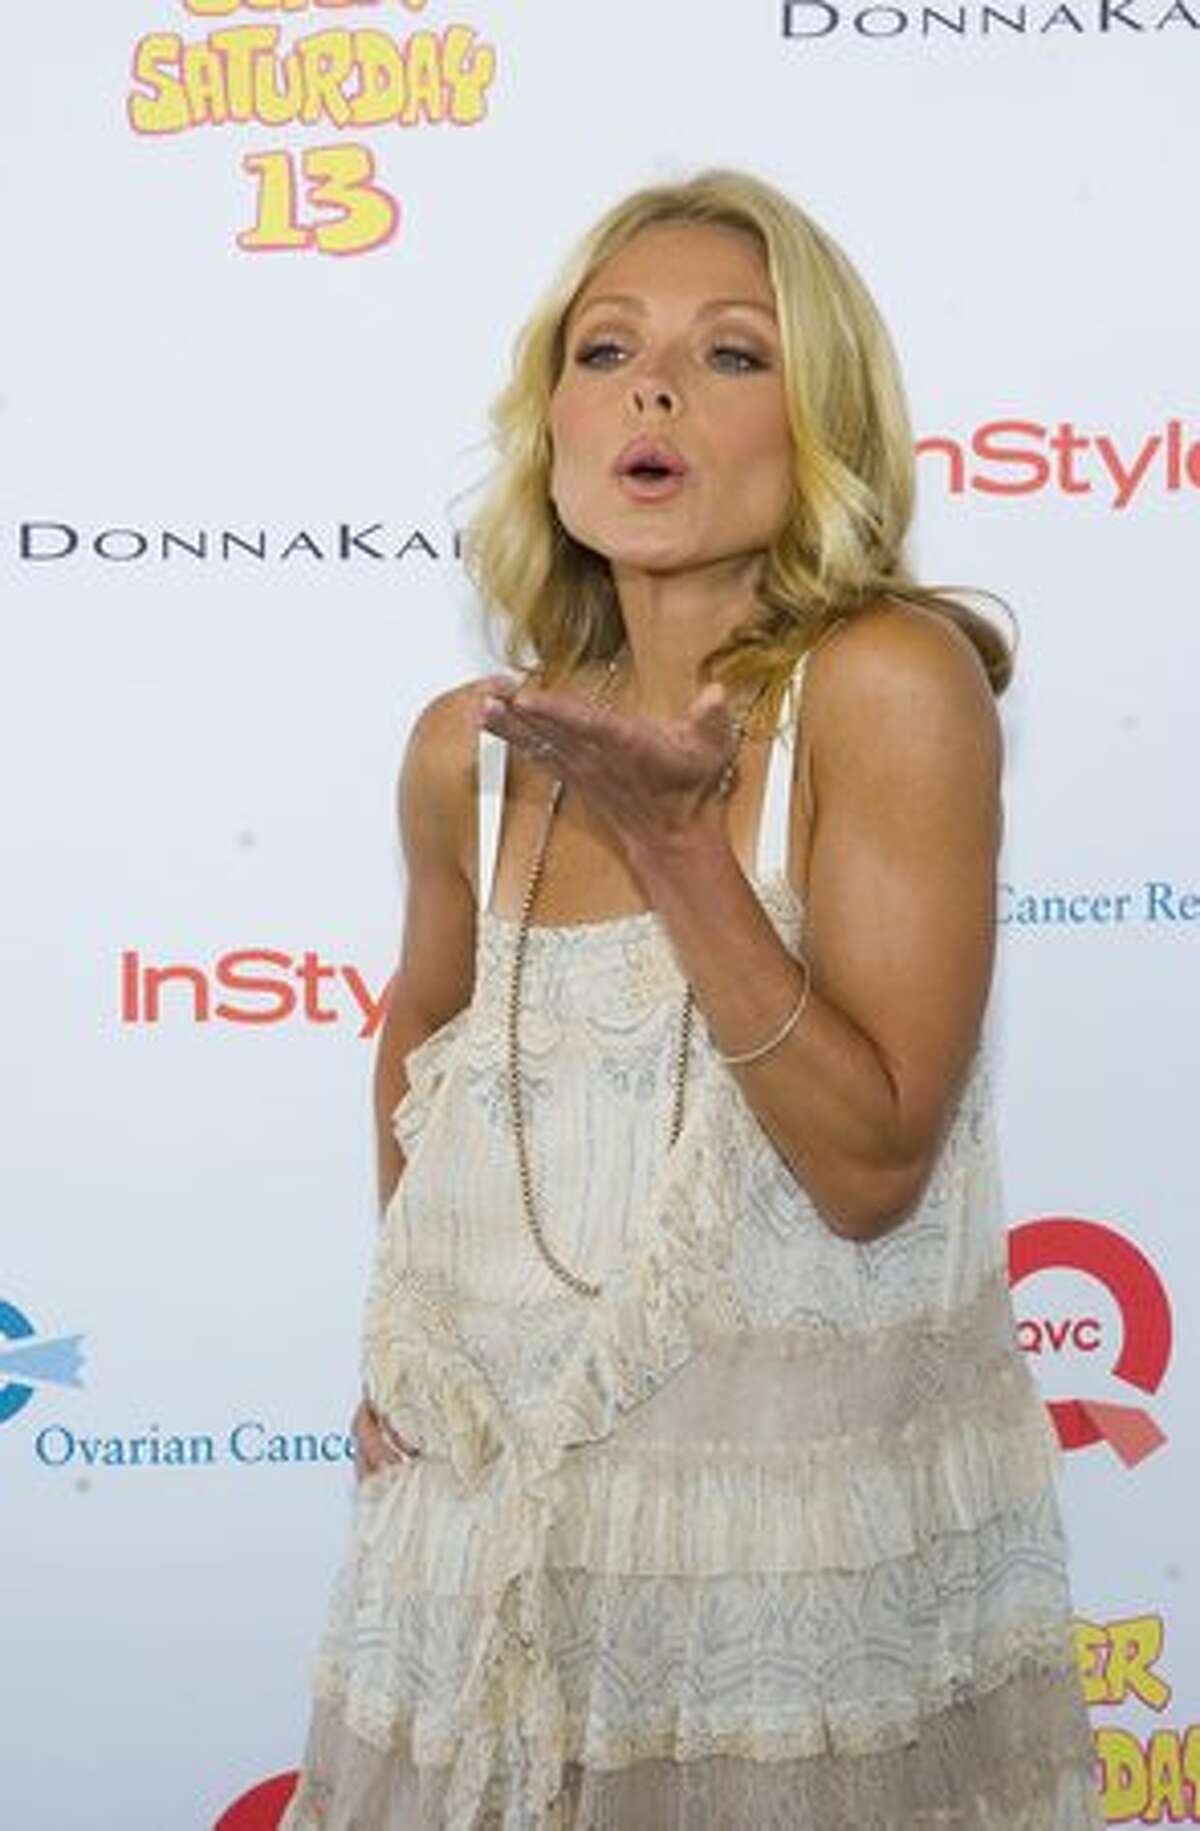 Television personality Kelly Ripa attends the 13th Annual Super Saturday event at Nova's Ark Project on July 31, 2010 in Water Mill, New York.